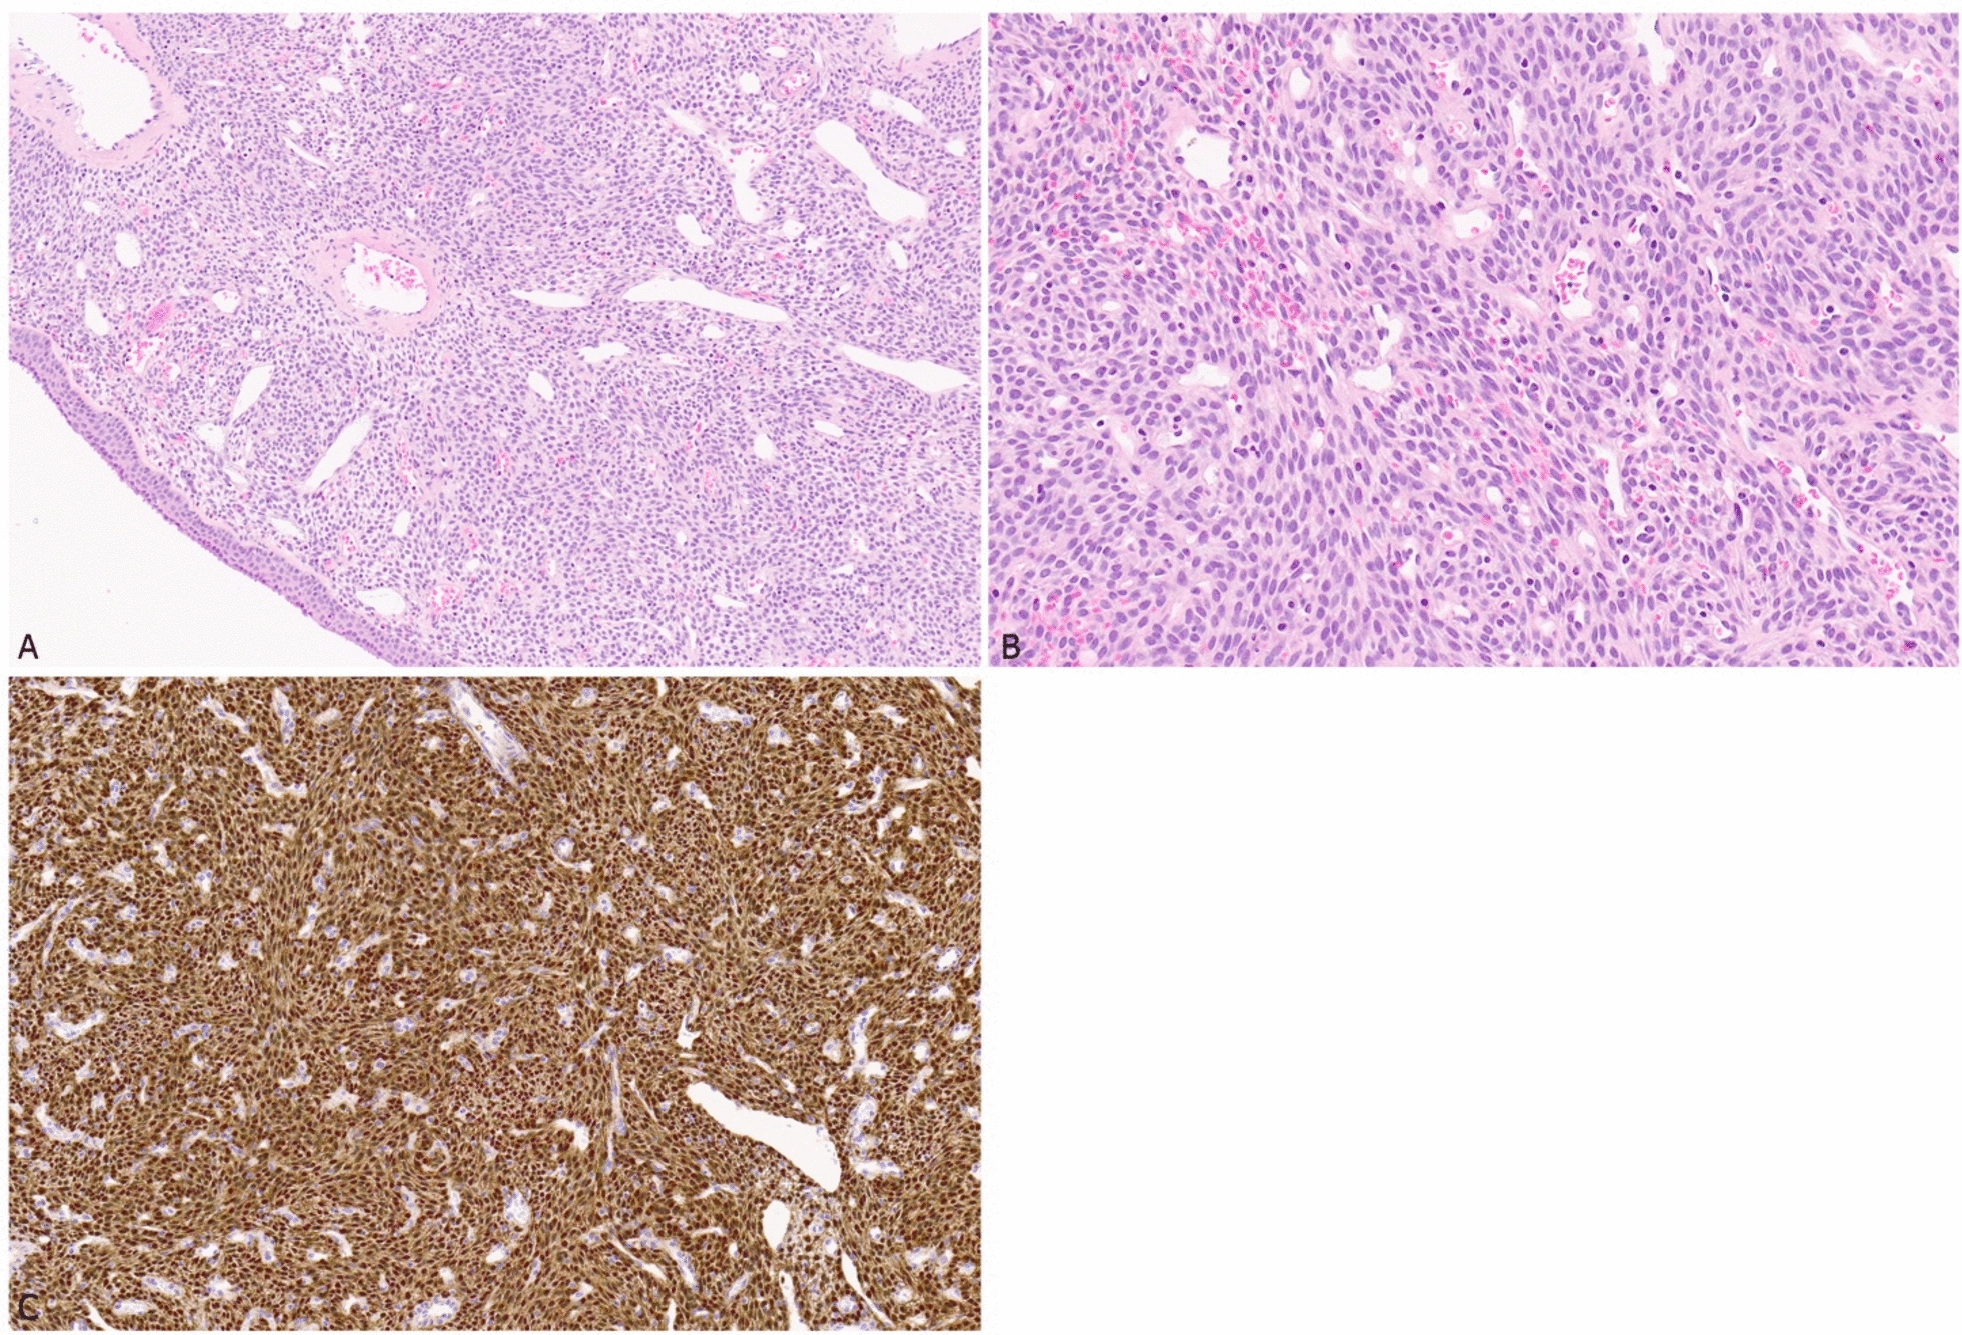 Spindle Cell Tumors of the Sinonasal Tract: A Diagnostic Update with Focus on Ancillary Workup